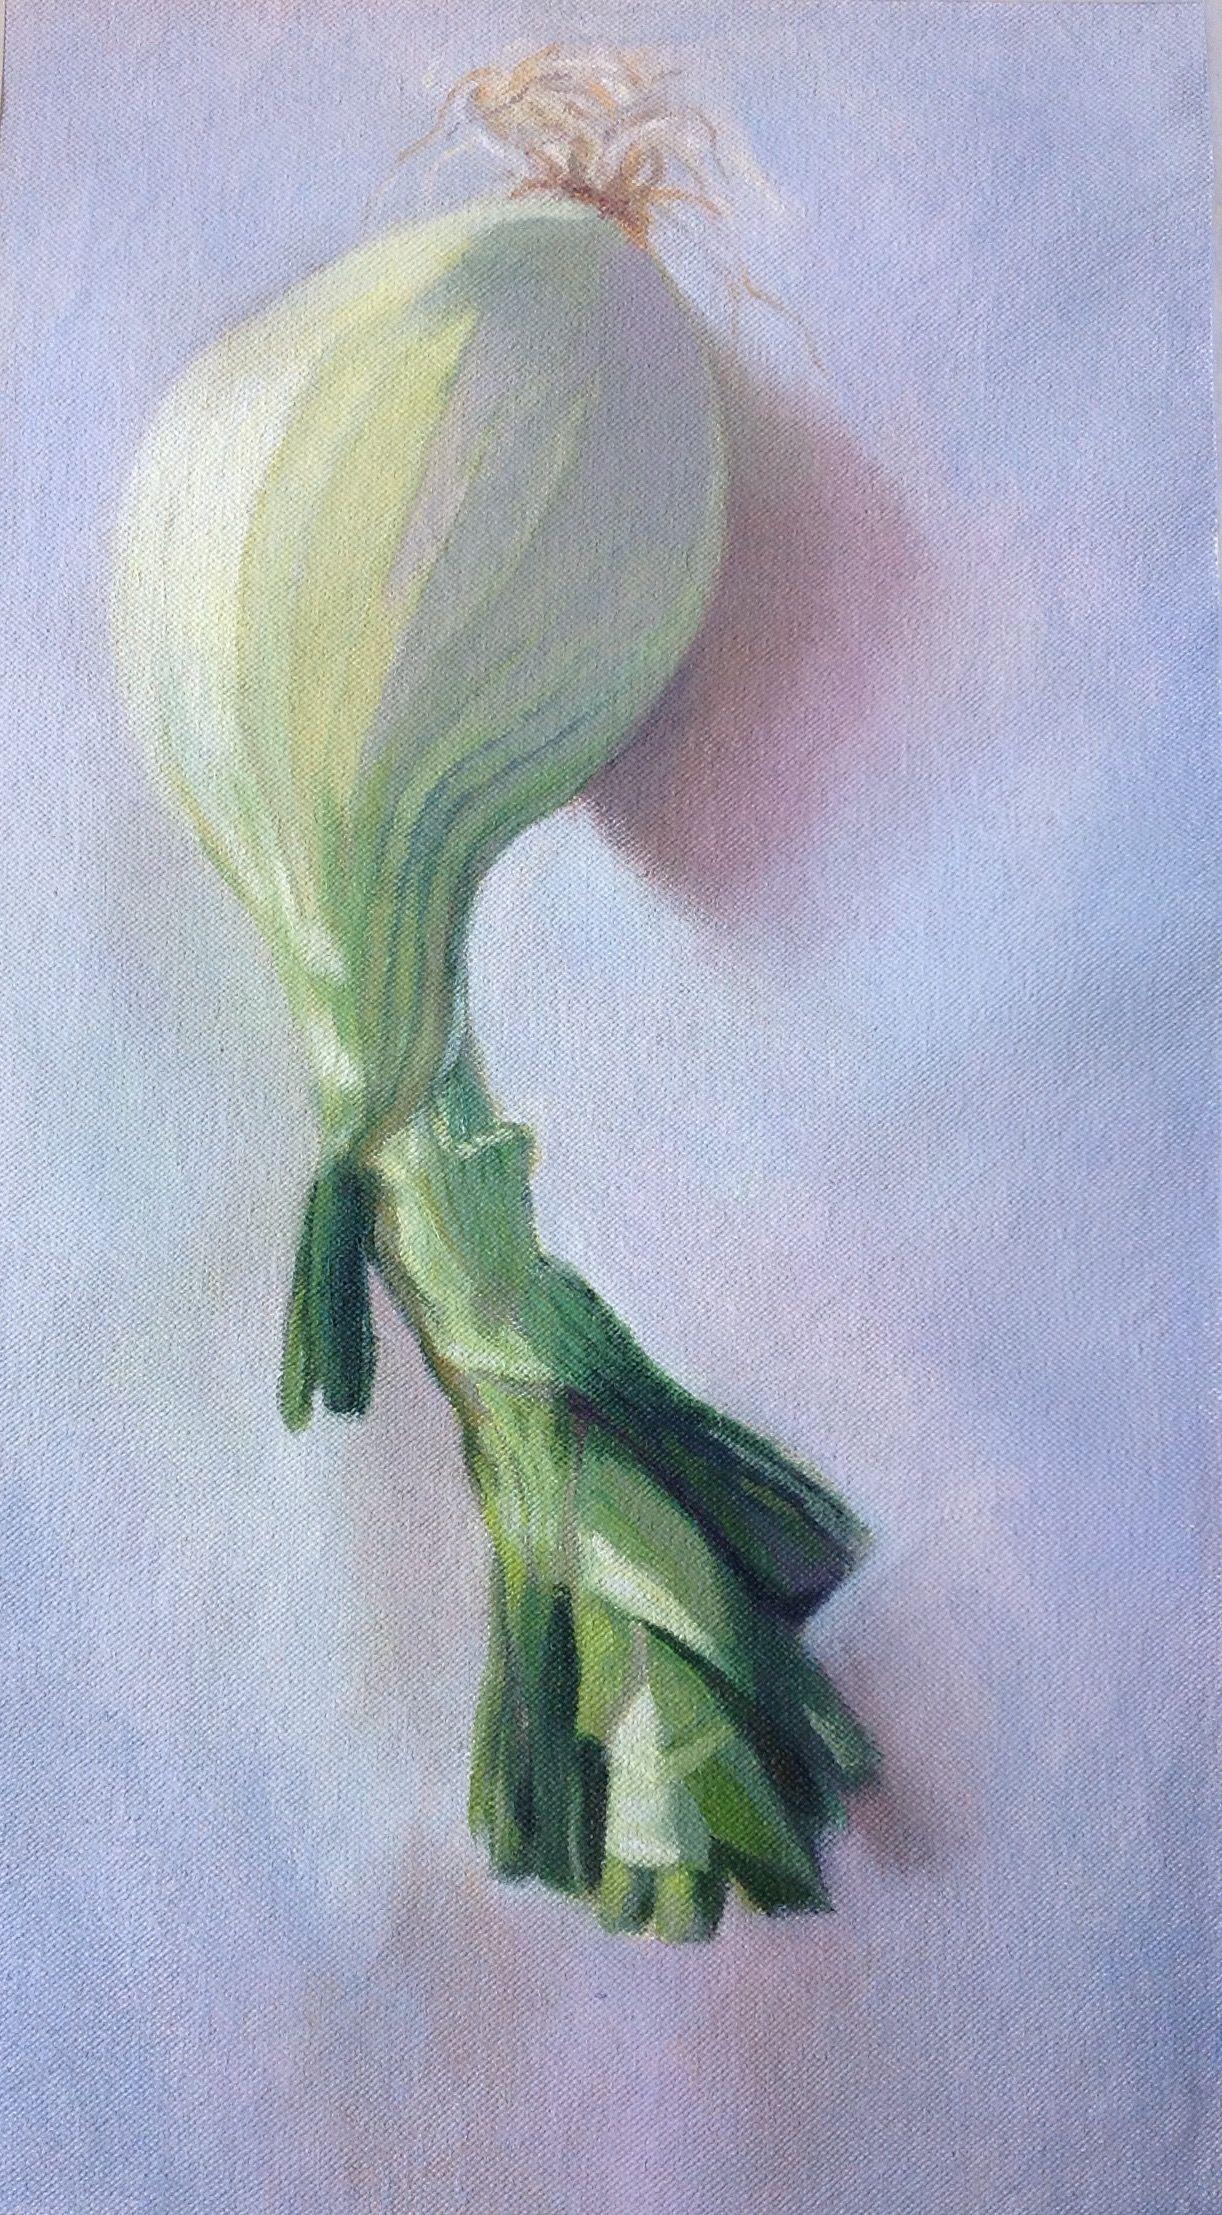 Acrylic on canvas. I liked the graceful shape of the onion and delicate greens degrading to almost white. :: Painting :: Contemporary :: This piece comes with an official certificate of authenticity signed by the artist :: Ready to Hang: No ::